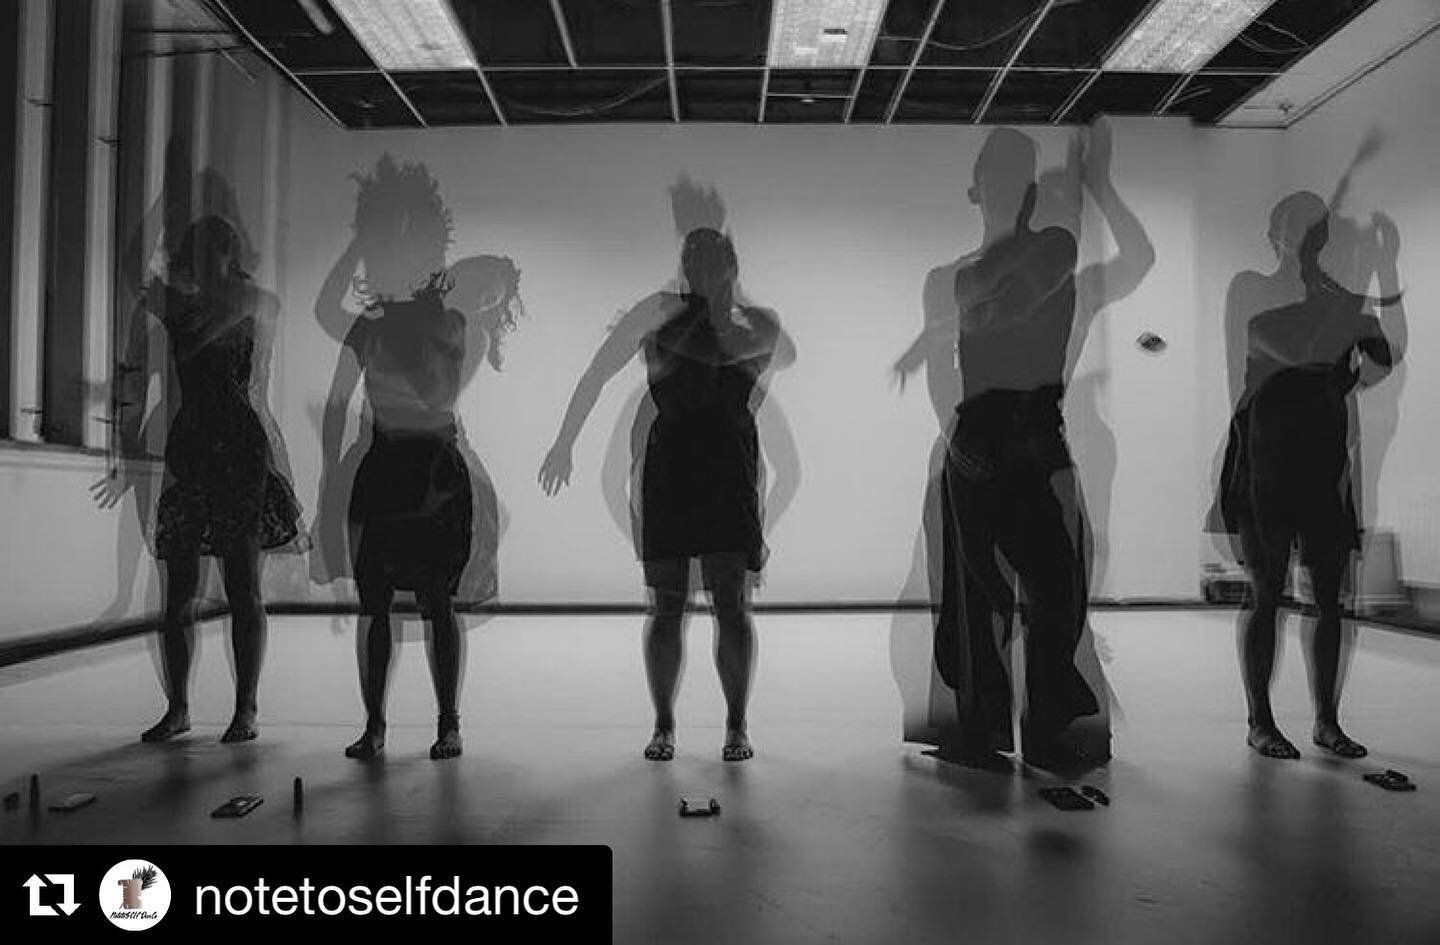 #Repost @notetoselfdance ♾
・・・
Amongst the current blur, try to find your focus, sit with it &amp; breathe through it🖤✨ .
.
.
.
. 
Stunning Image📸: Desiree A North
@desireeanorthart @terpsichoreinfocus Choreographer: Natasha Lee @CocoRed81
Artists: